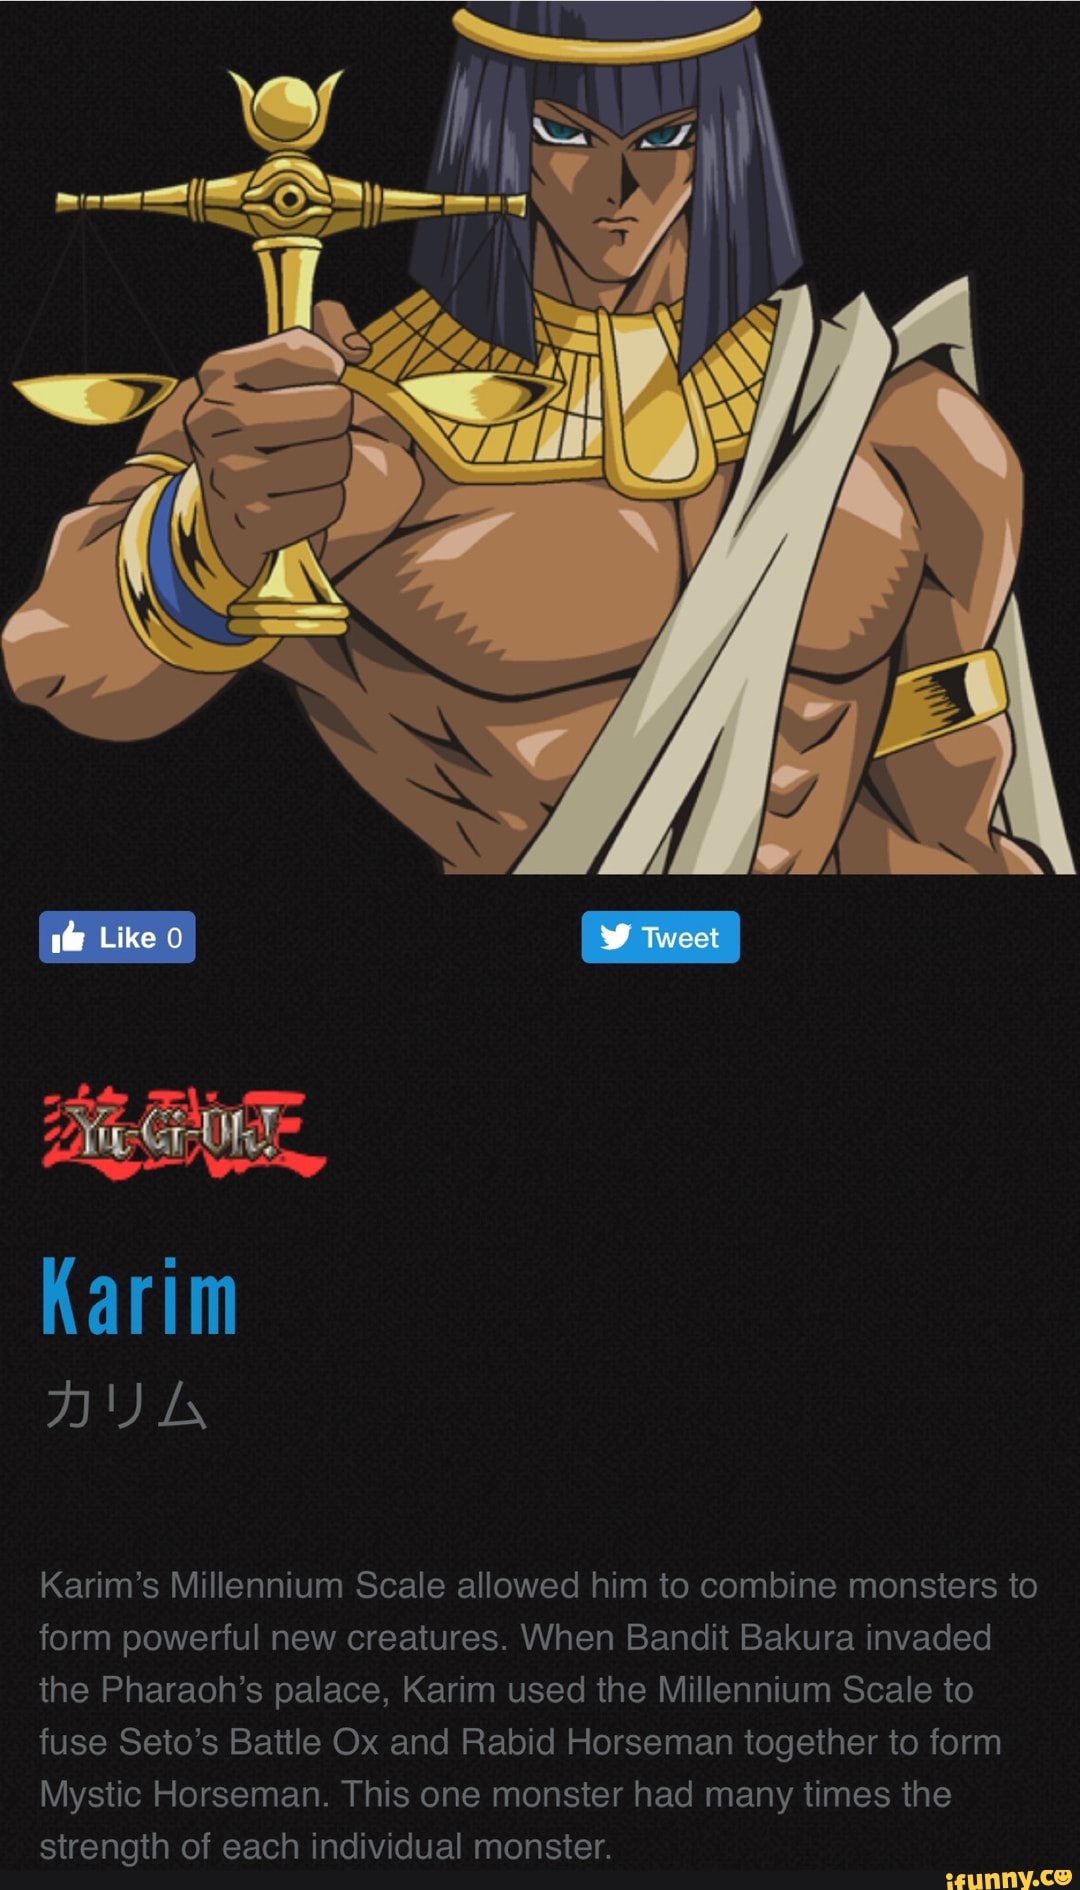 Karim's Millennium Scale allowed him to combine monsters to form